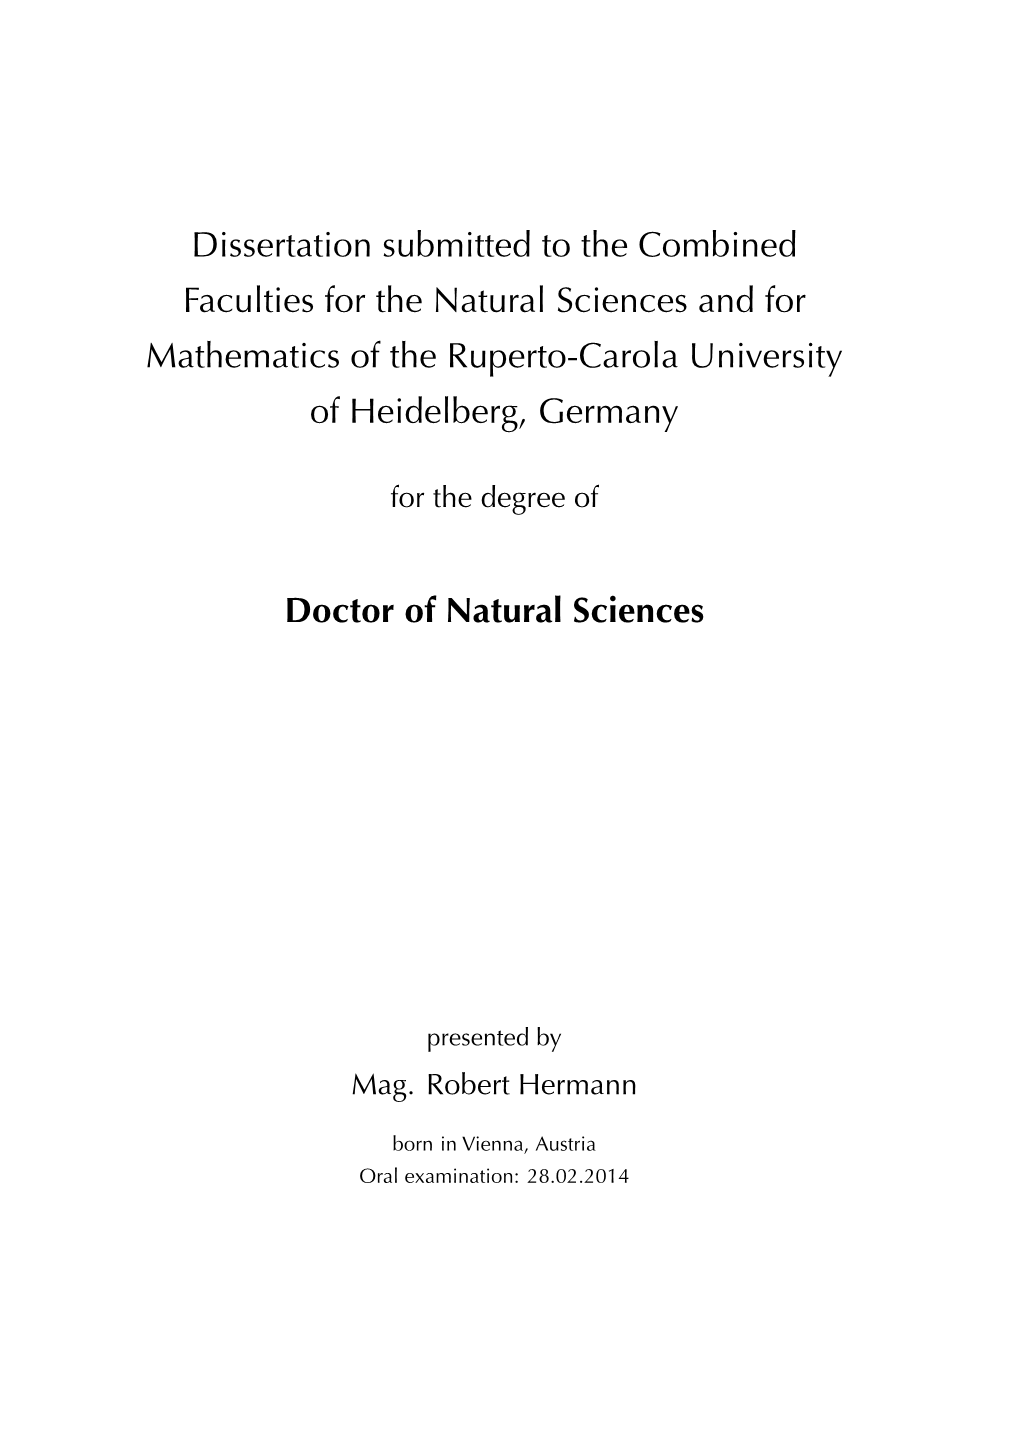 Dissertation Submitted to the Combined Faculties for the Natural Sciences and for Mathematics of the Ruperto-Carola University of Heidelberg, Germany